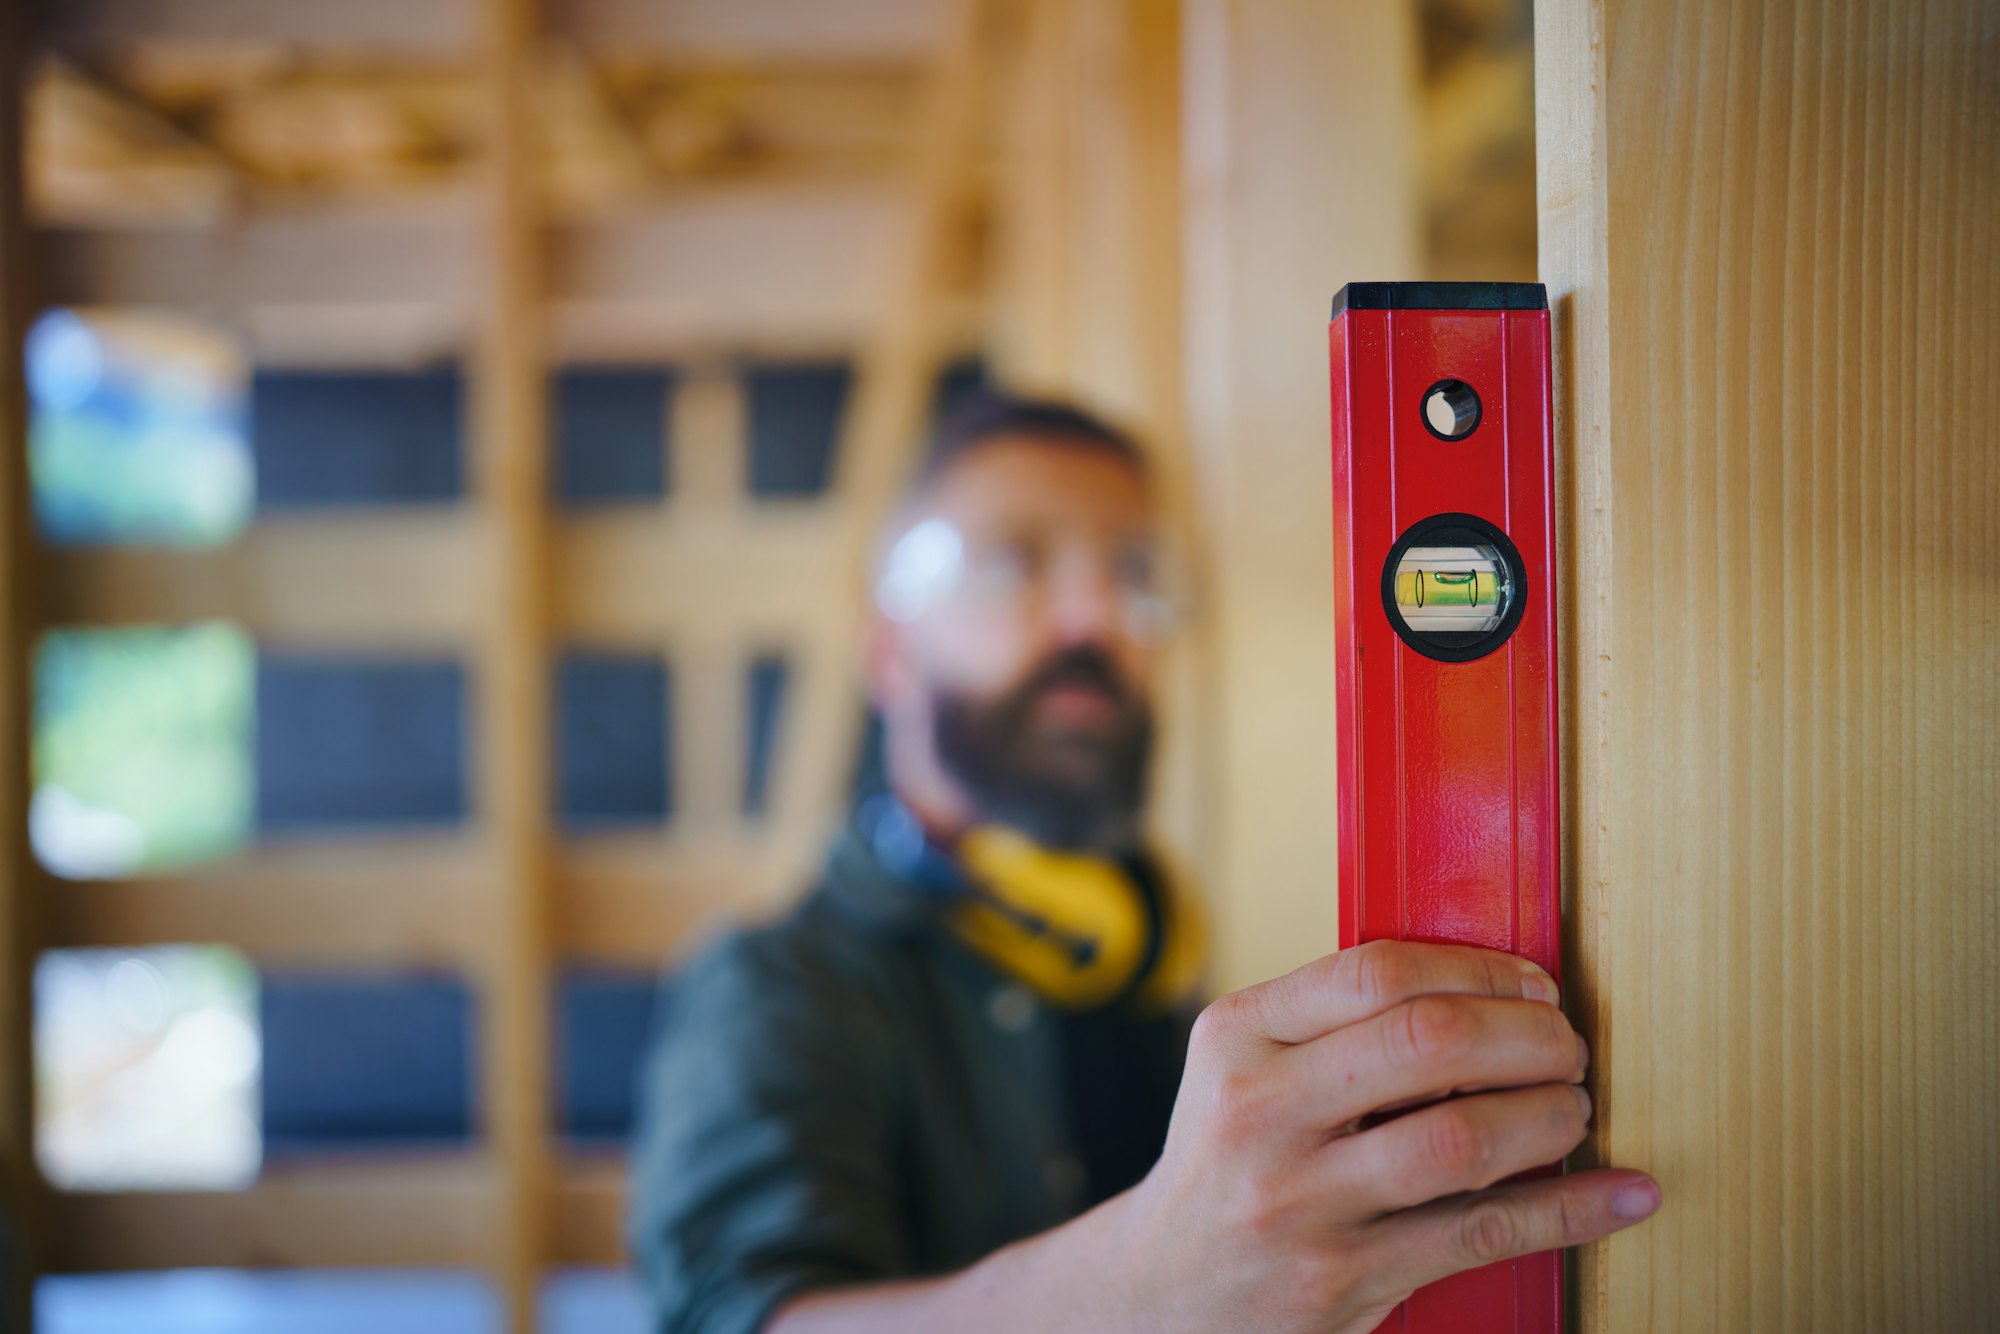 Carpenter checking wooden planks with spirit level, diy eco-friendly homes concept.